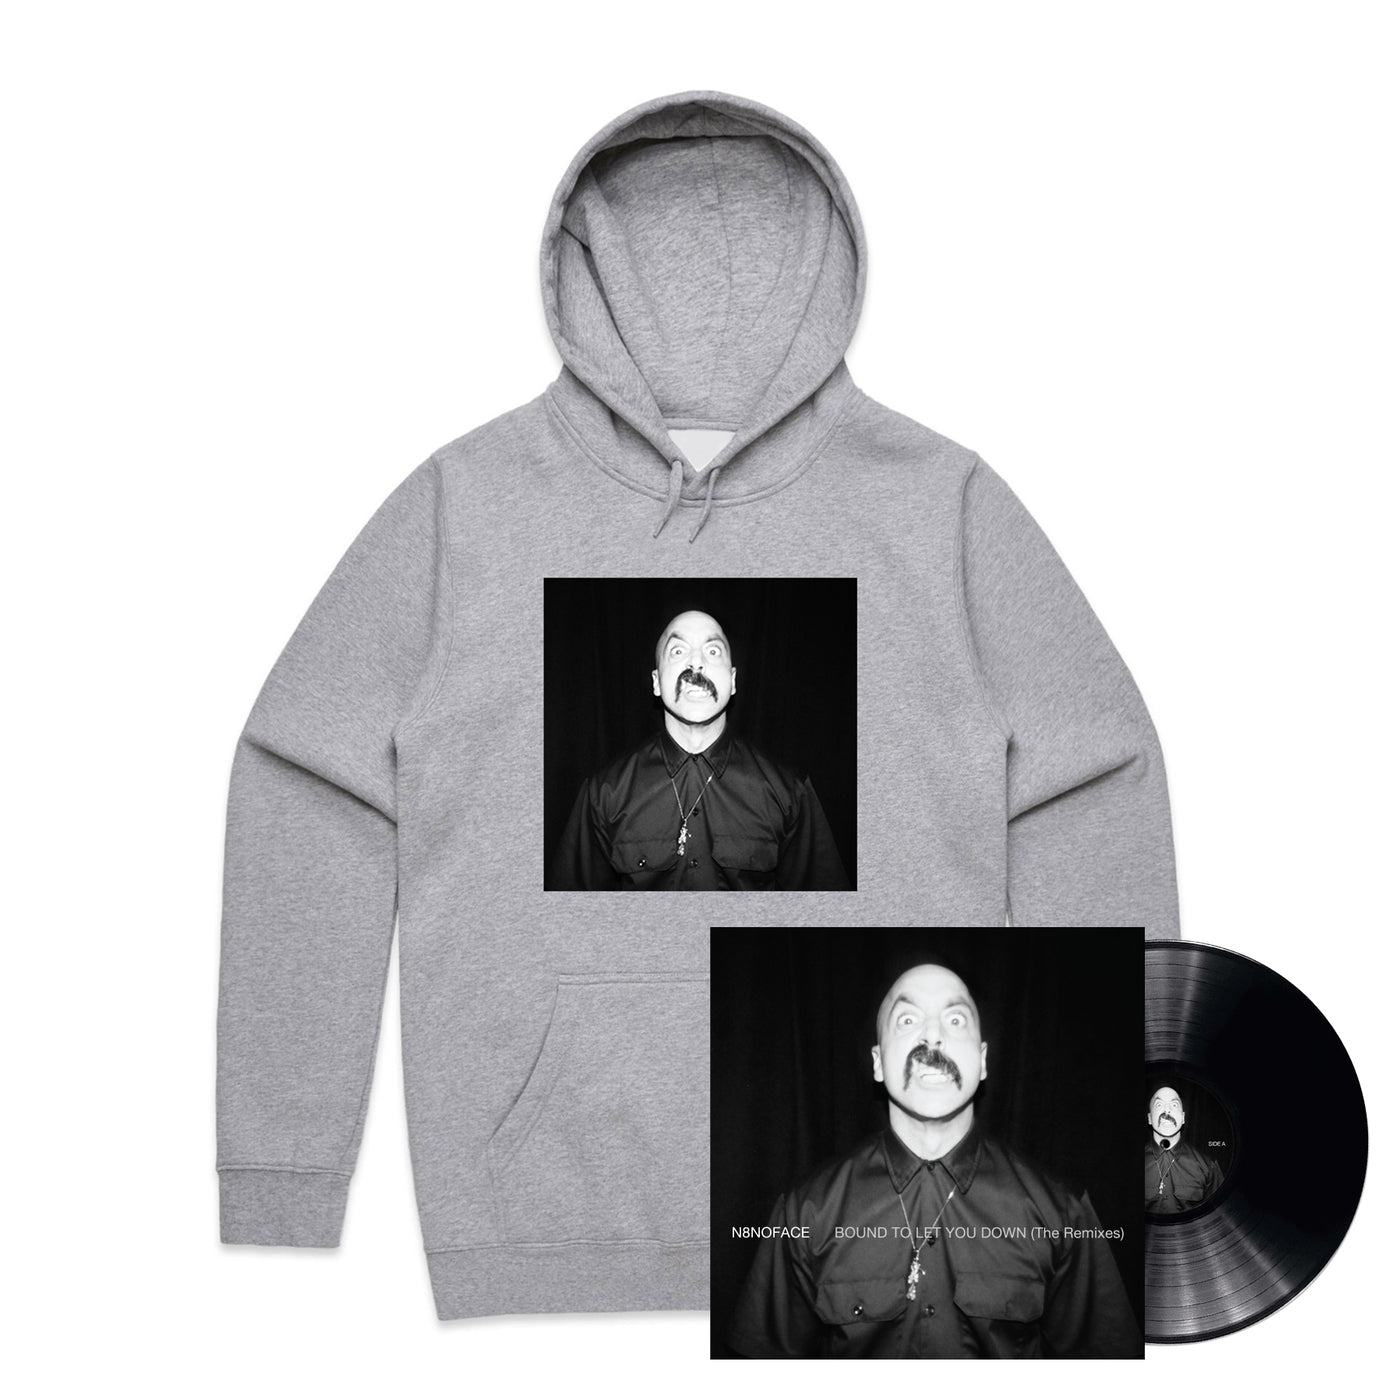 N8NOFACE - Bound to Let You Down (The Remixes) Hoodie + Vinyl